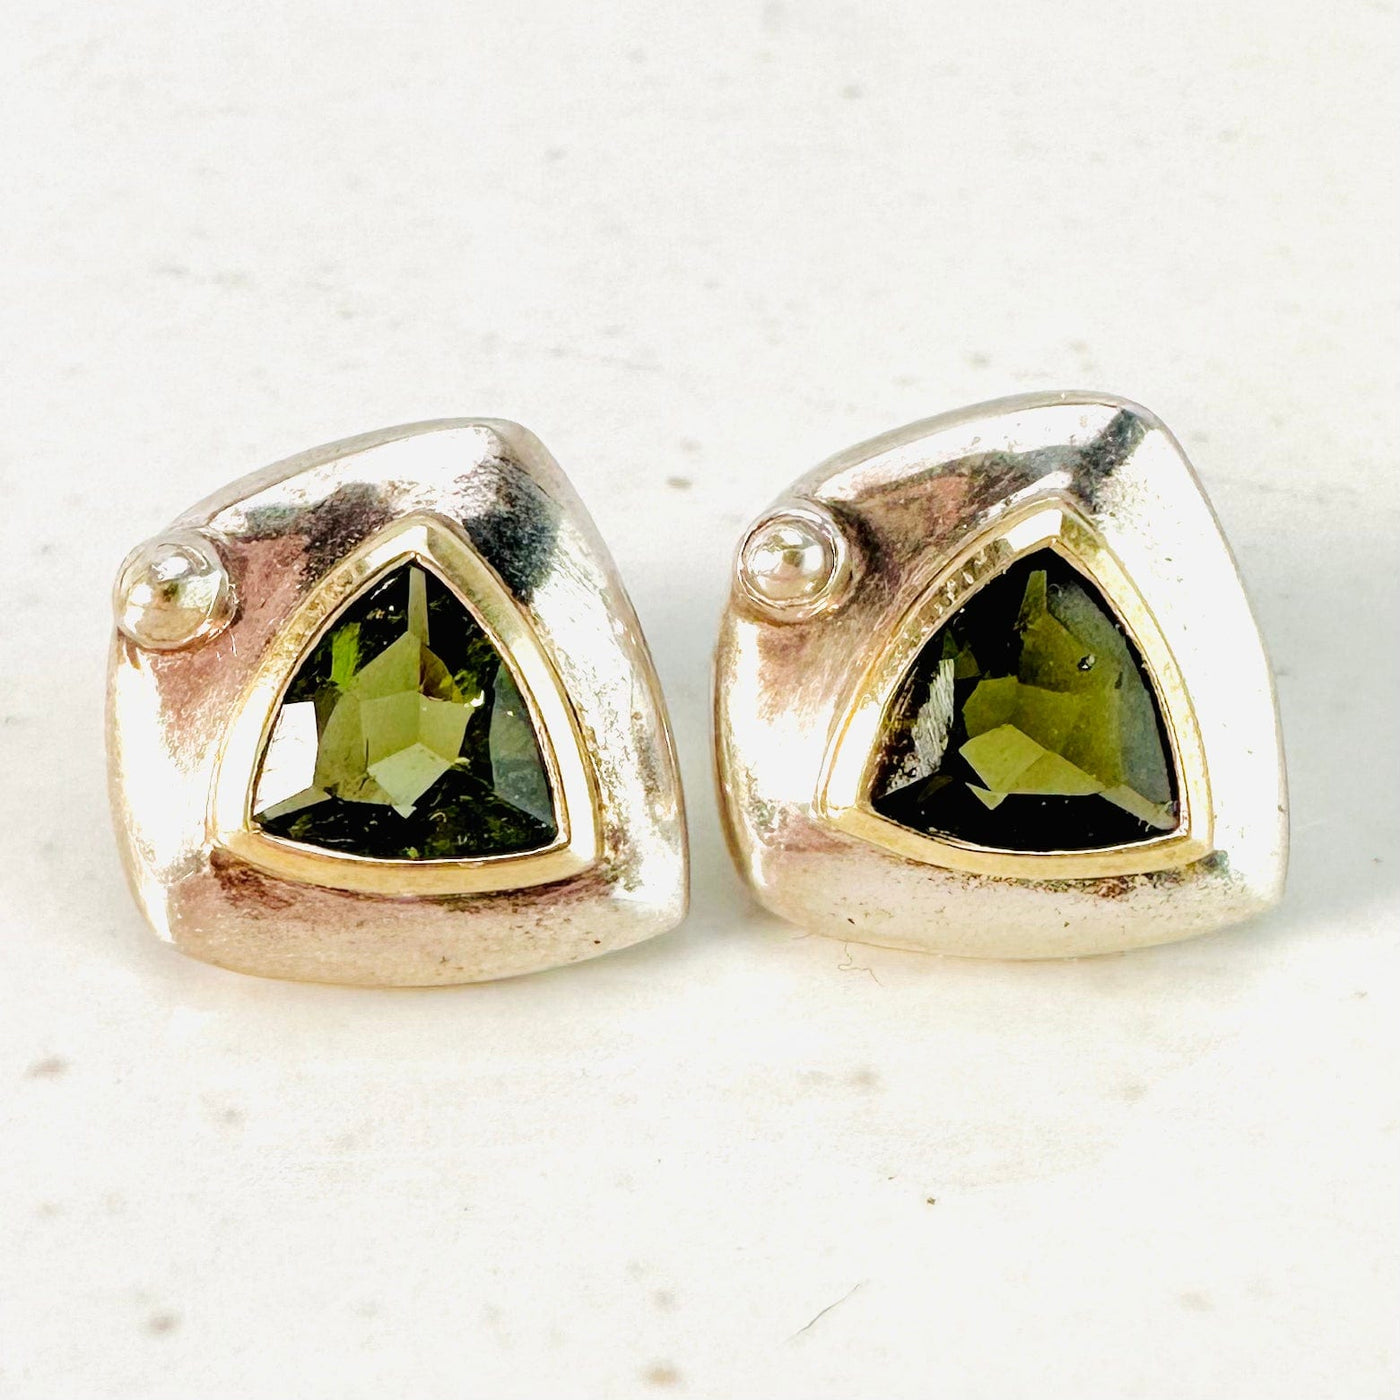 Up close view of Moldavite earrings on a white surface.